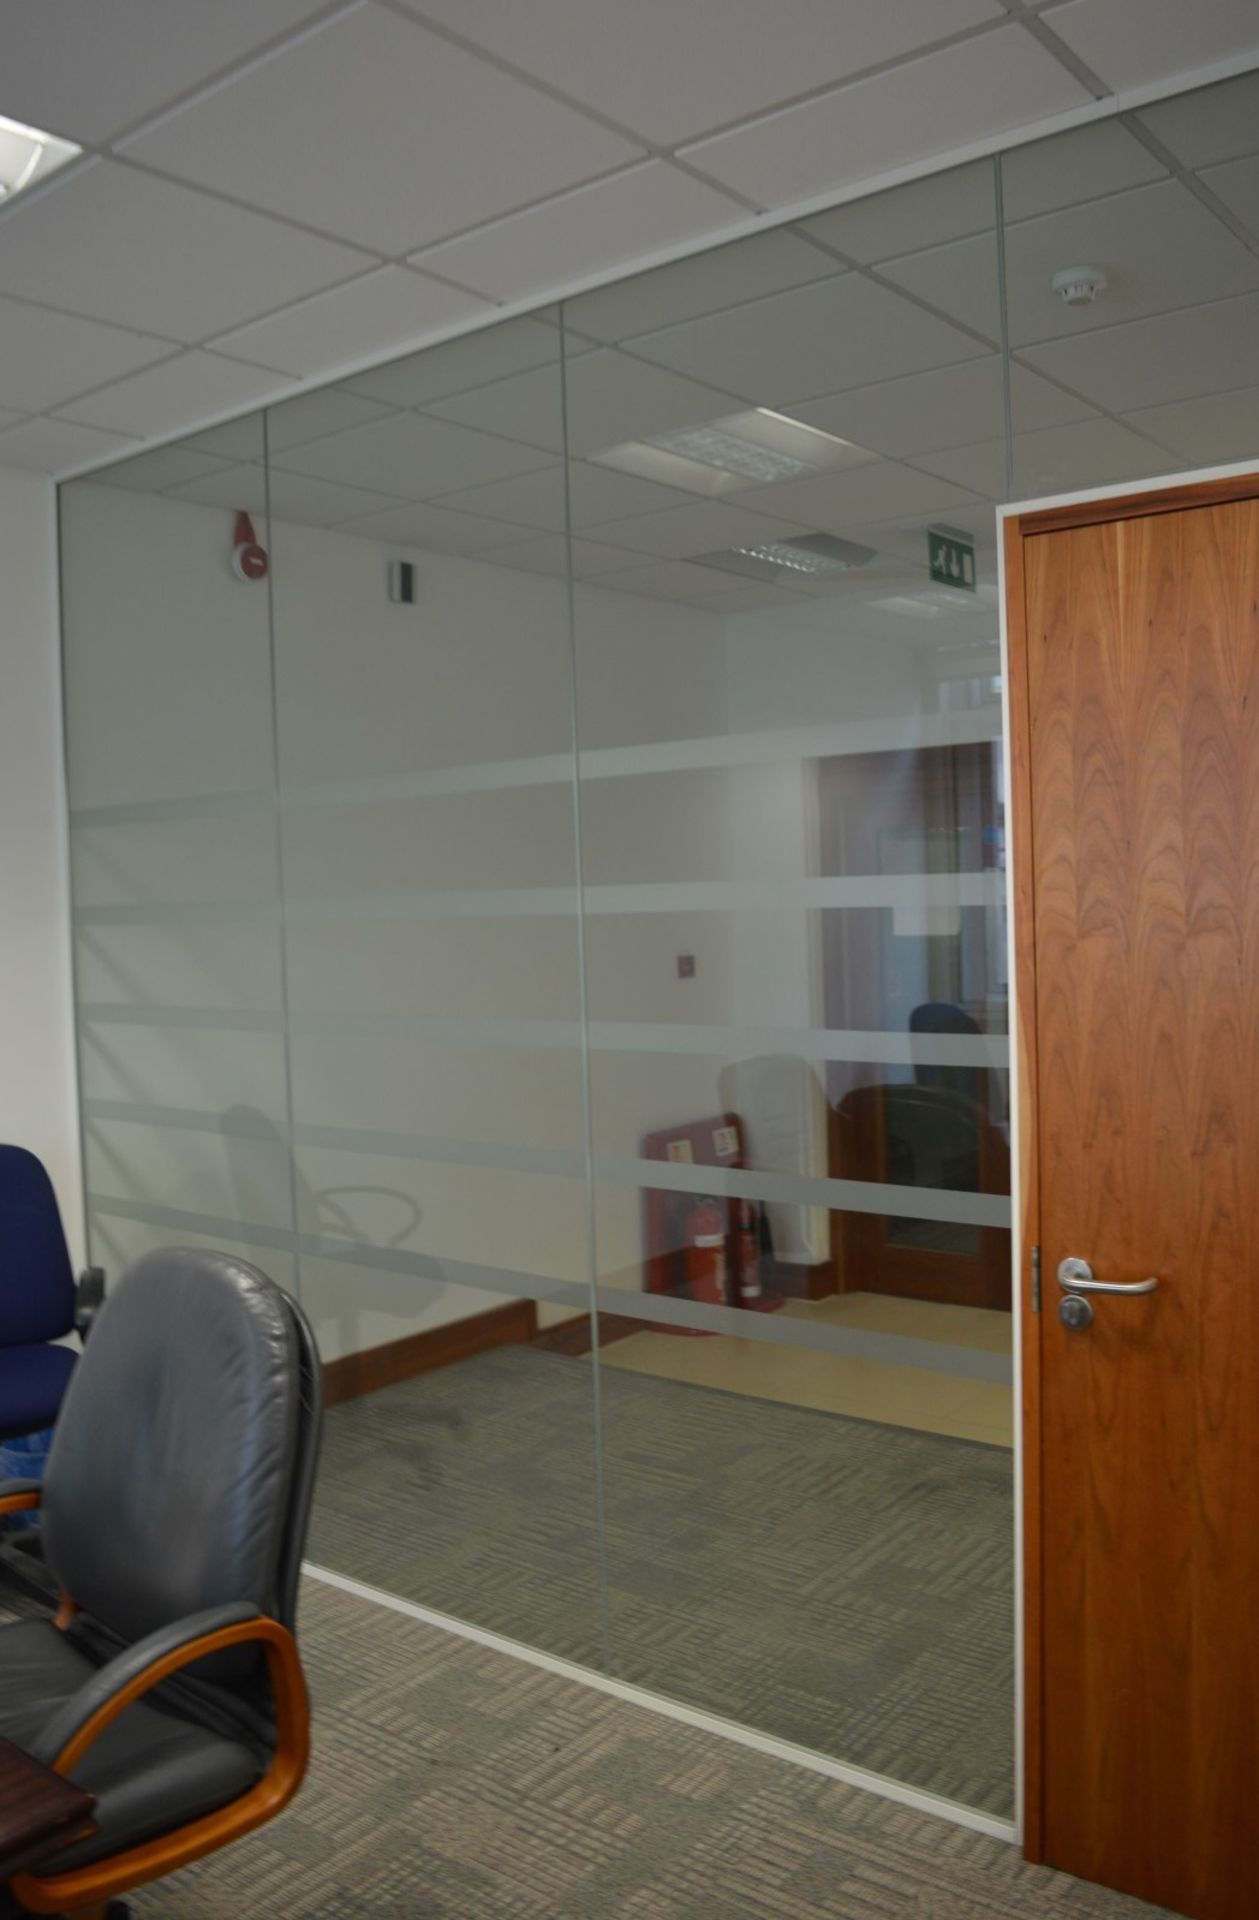 1 x Frameless Glass Partition Corner Office Run – Suitable For Upto Four Offices - Perfect For - Image 7 of 10